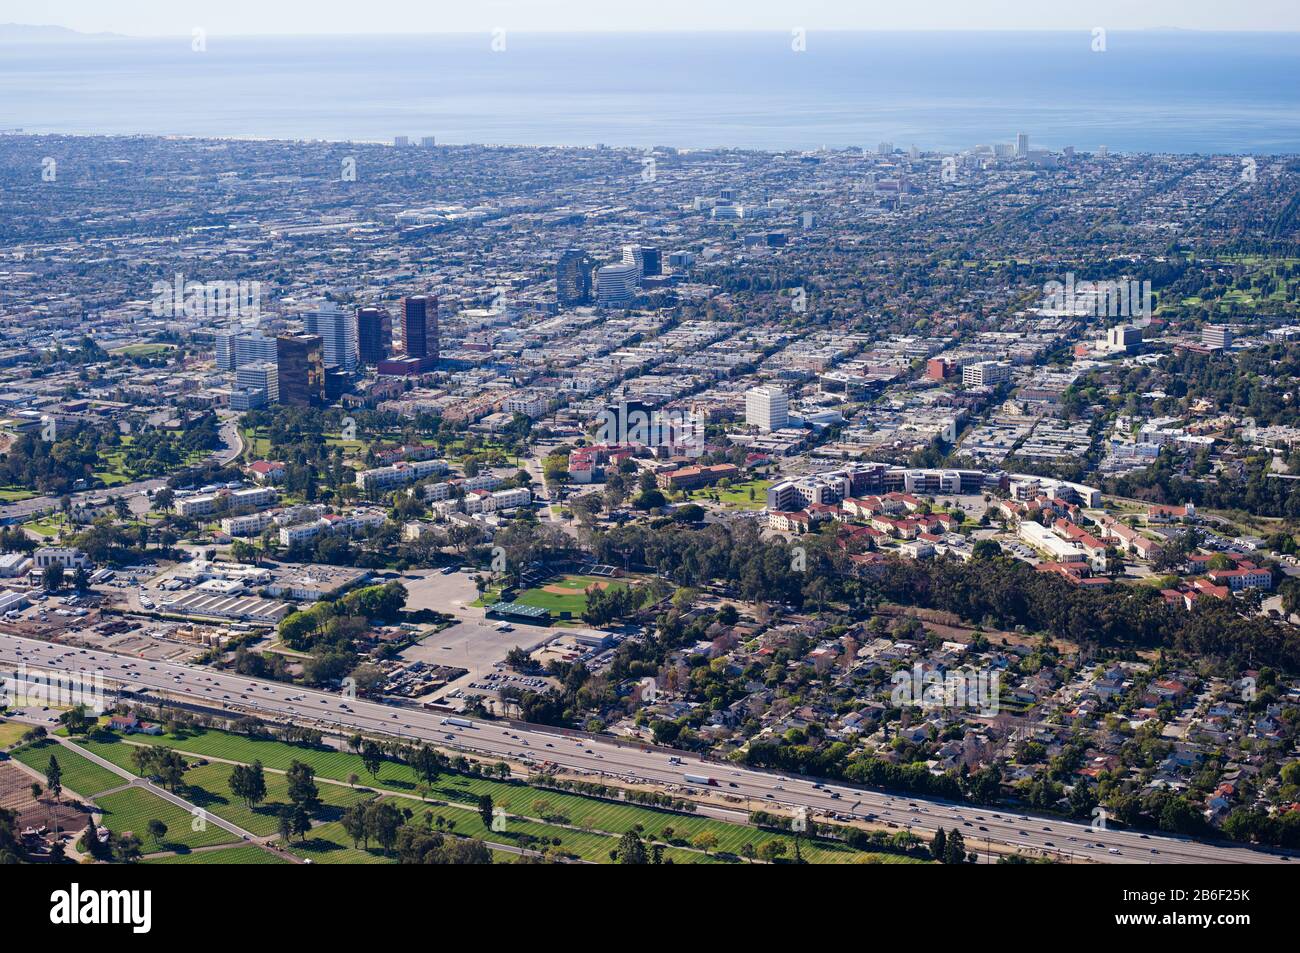 Aerial view of West Los Angeles, Los Angeles, California, USA Stock Photo